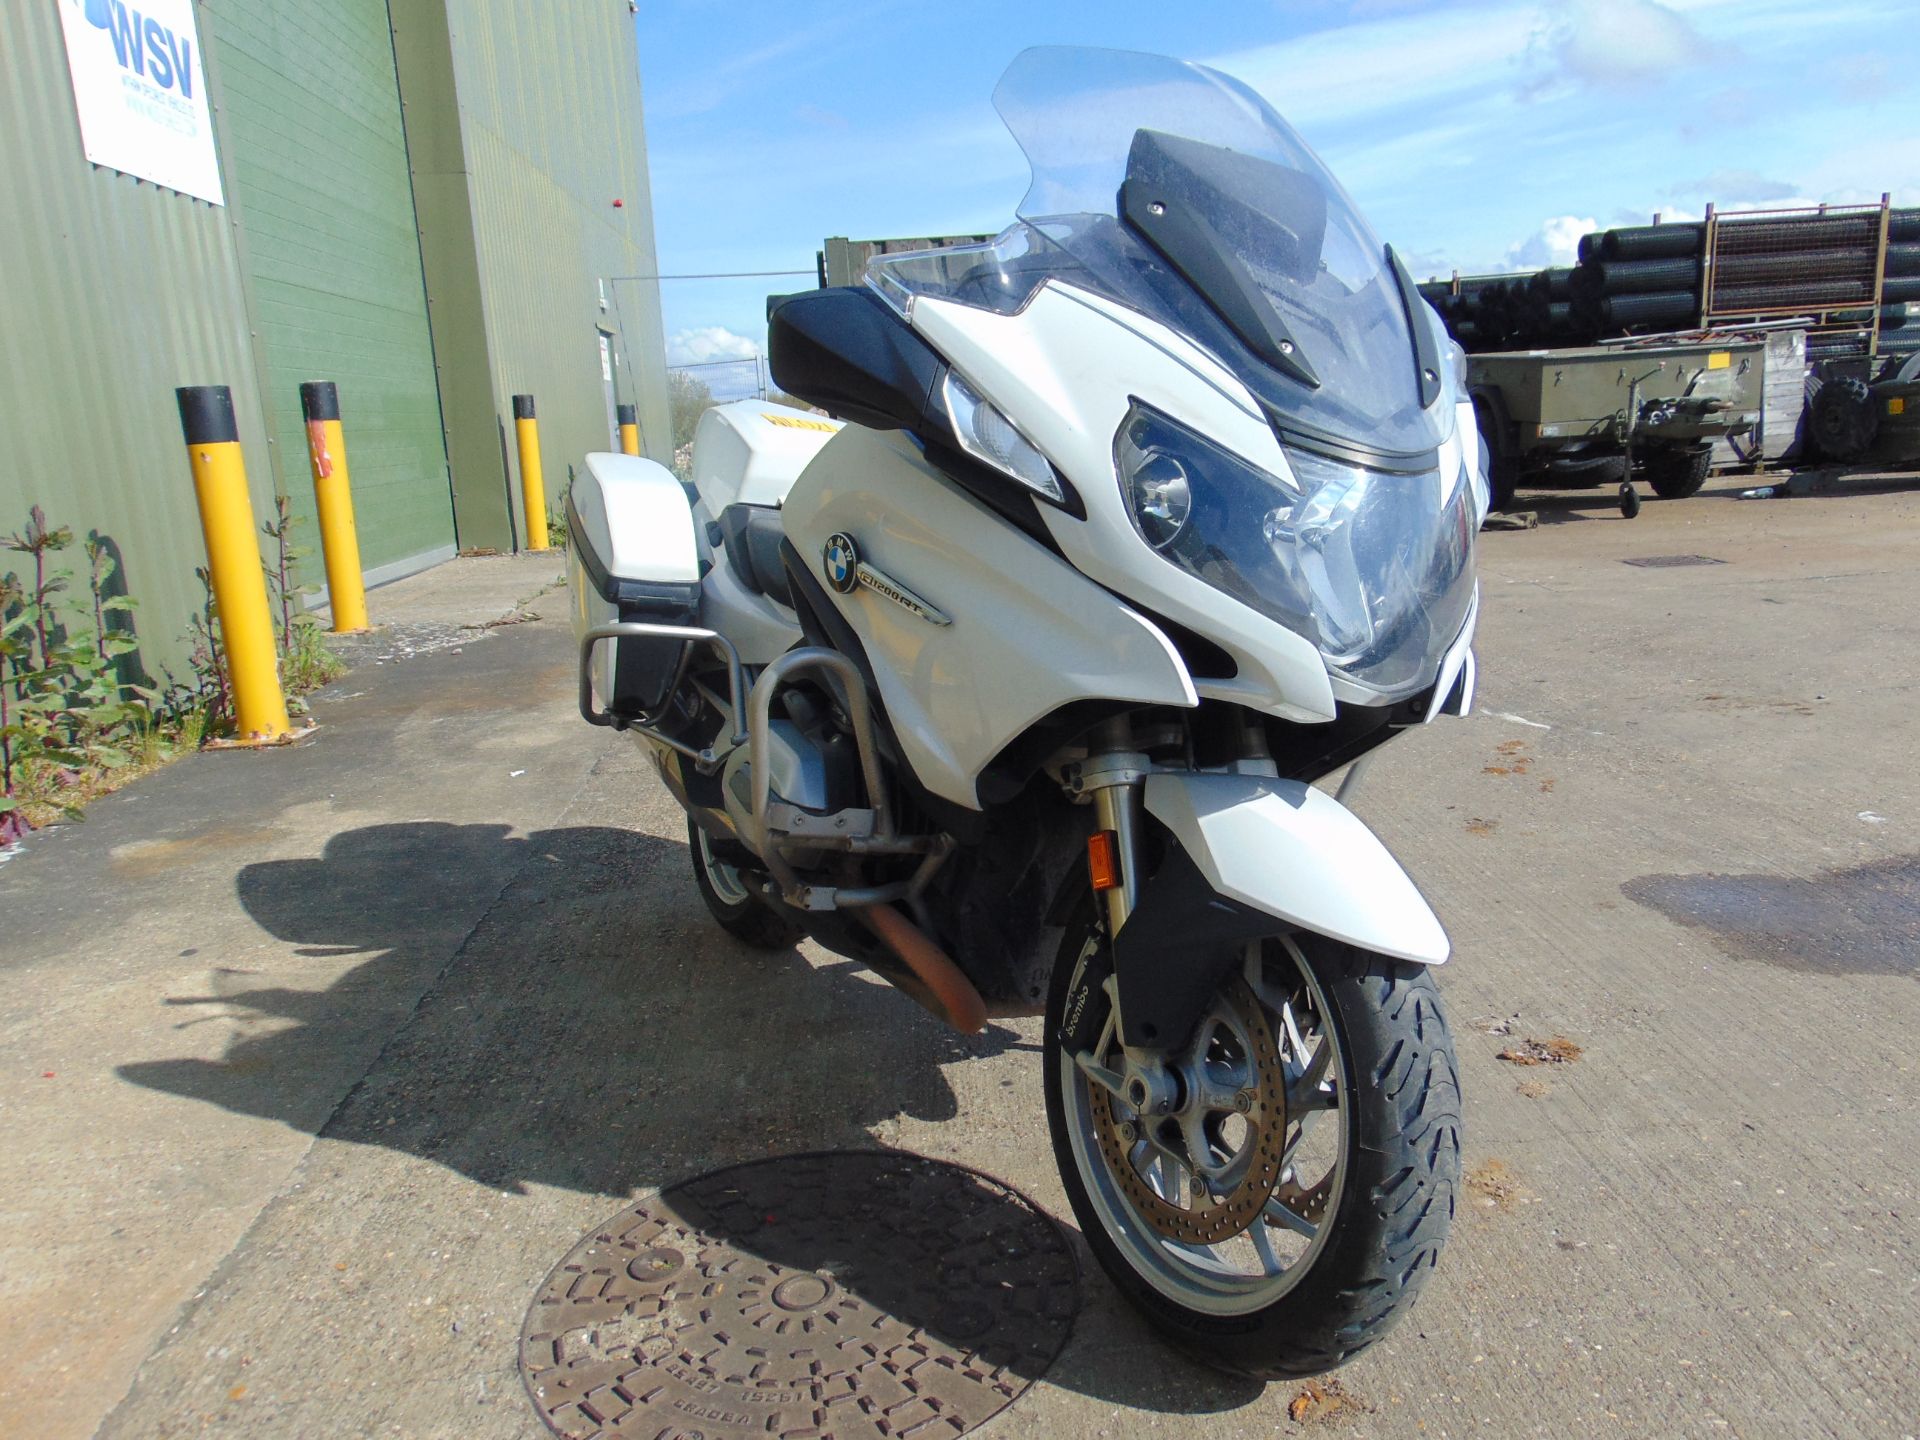 2018 BMW R1200RT Motorbike 50,000 miles from UK Police - Image 9 of 38